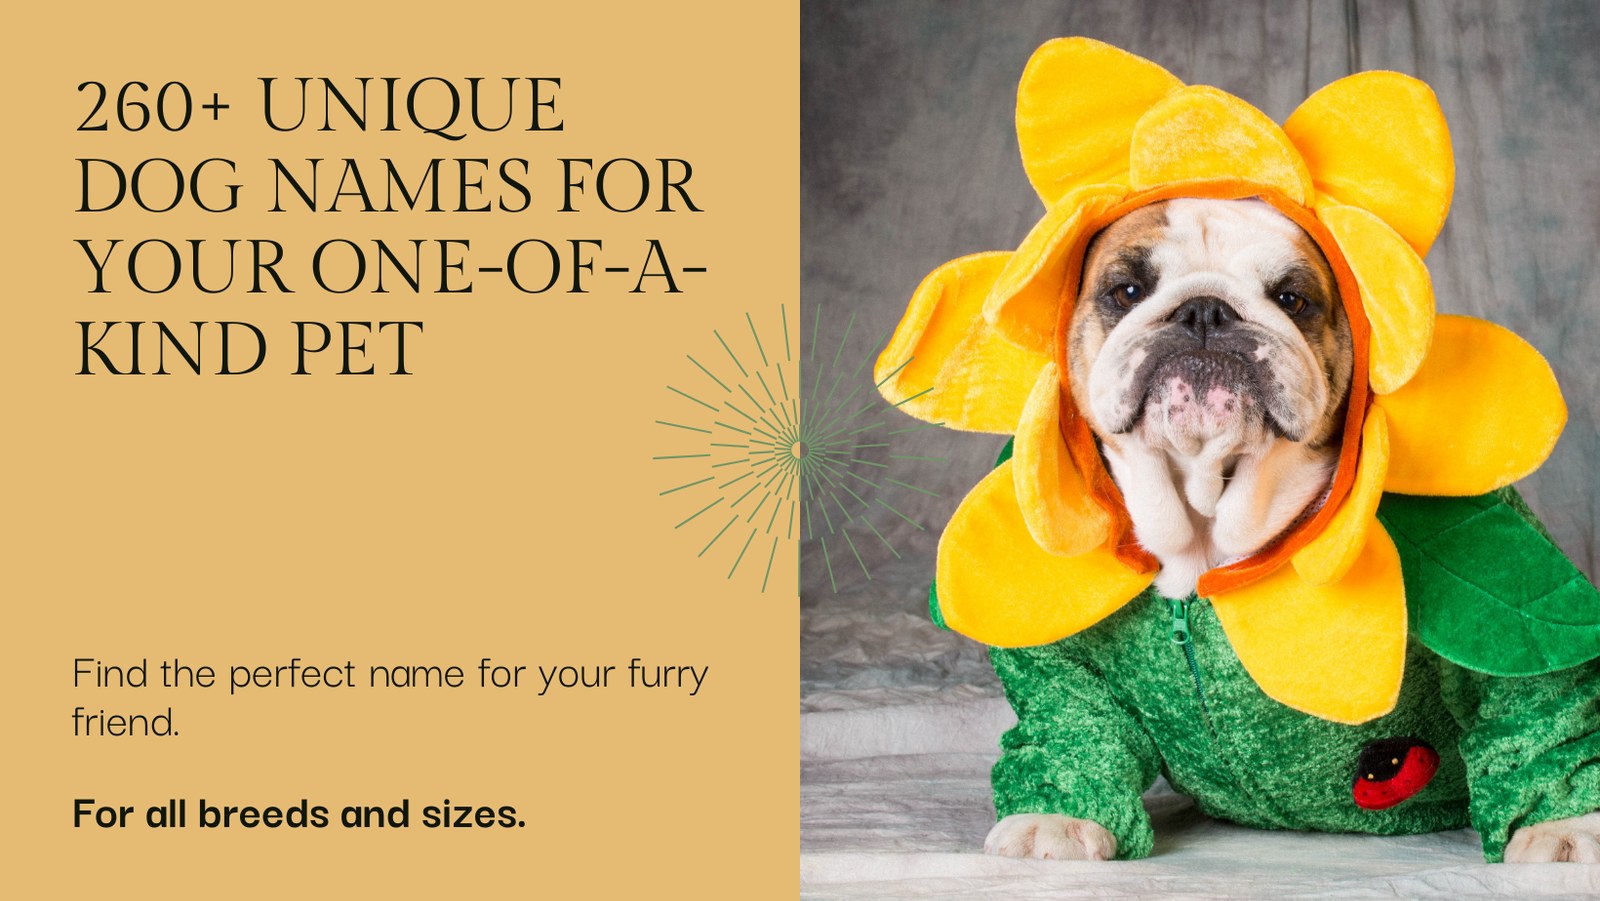 260+ Unique Dog Names for Your One-of-a-Kind Pet